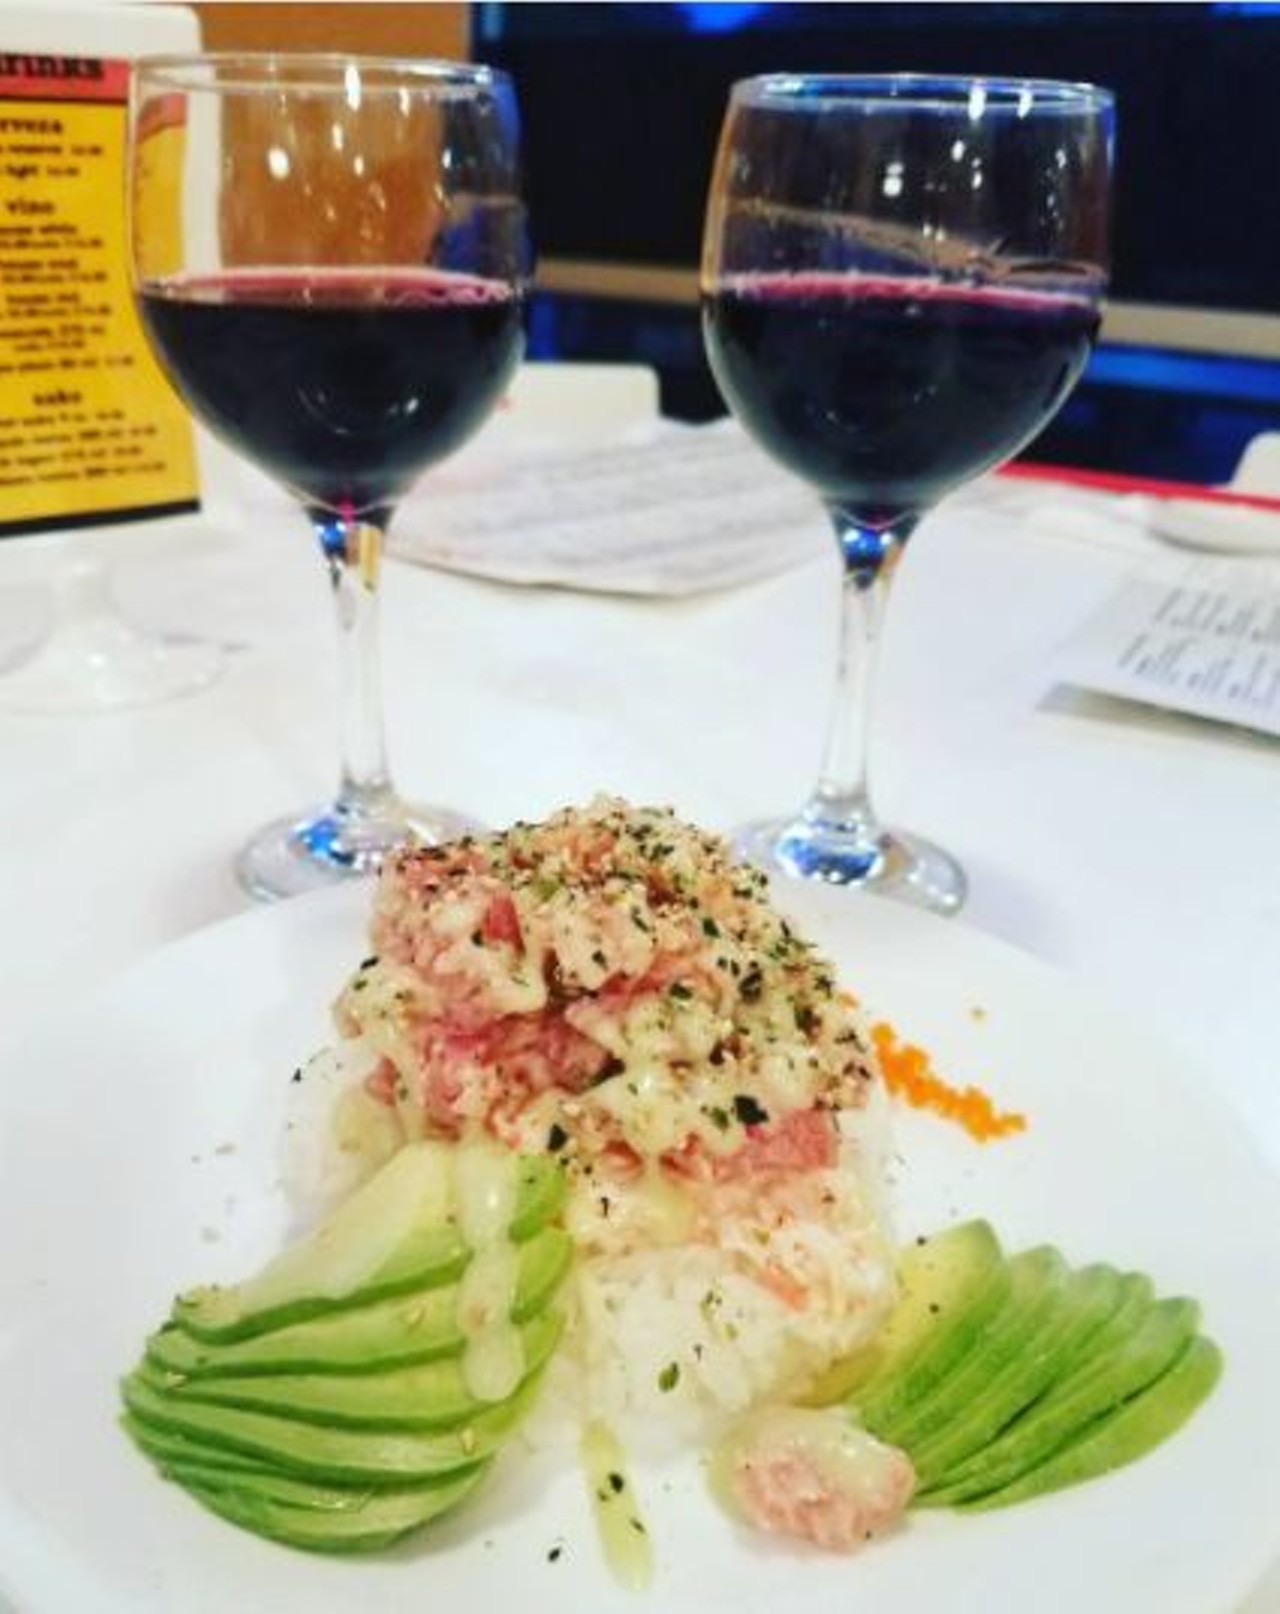 Yellowfish Sushi 
9102 Wurzbach Road, (210) 614-3474 
Yellowfish Sushi is a perfect spot for a dinner date over wine.
Photo via Instagram, armbar.lennie